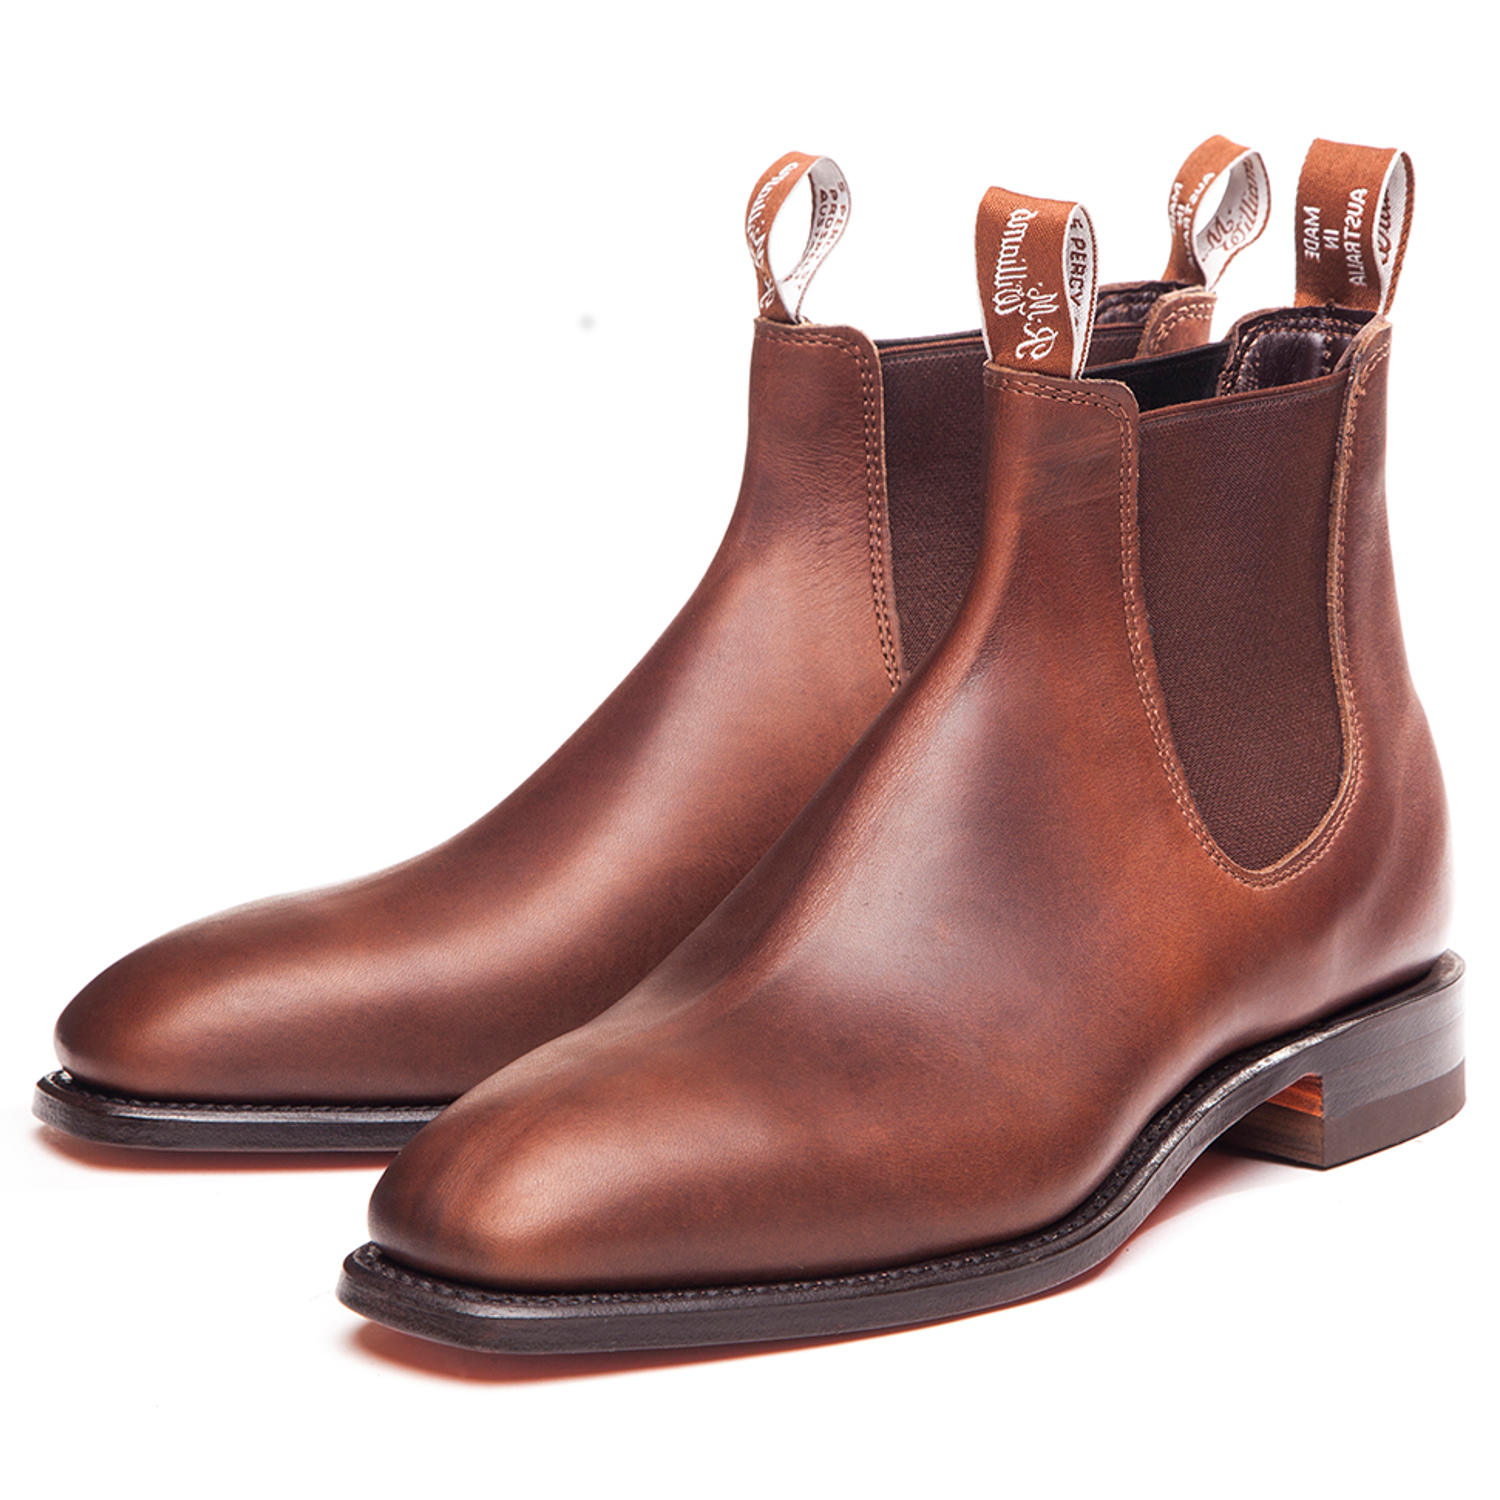 rm williams boots on sale